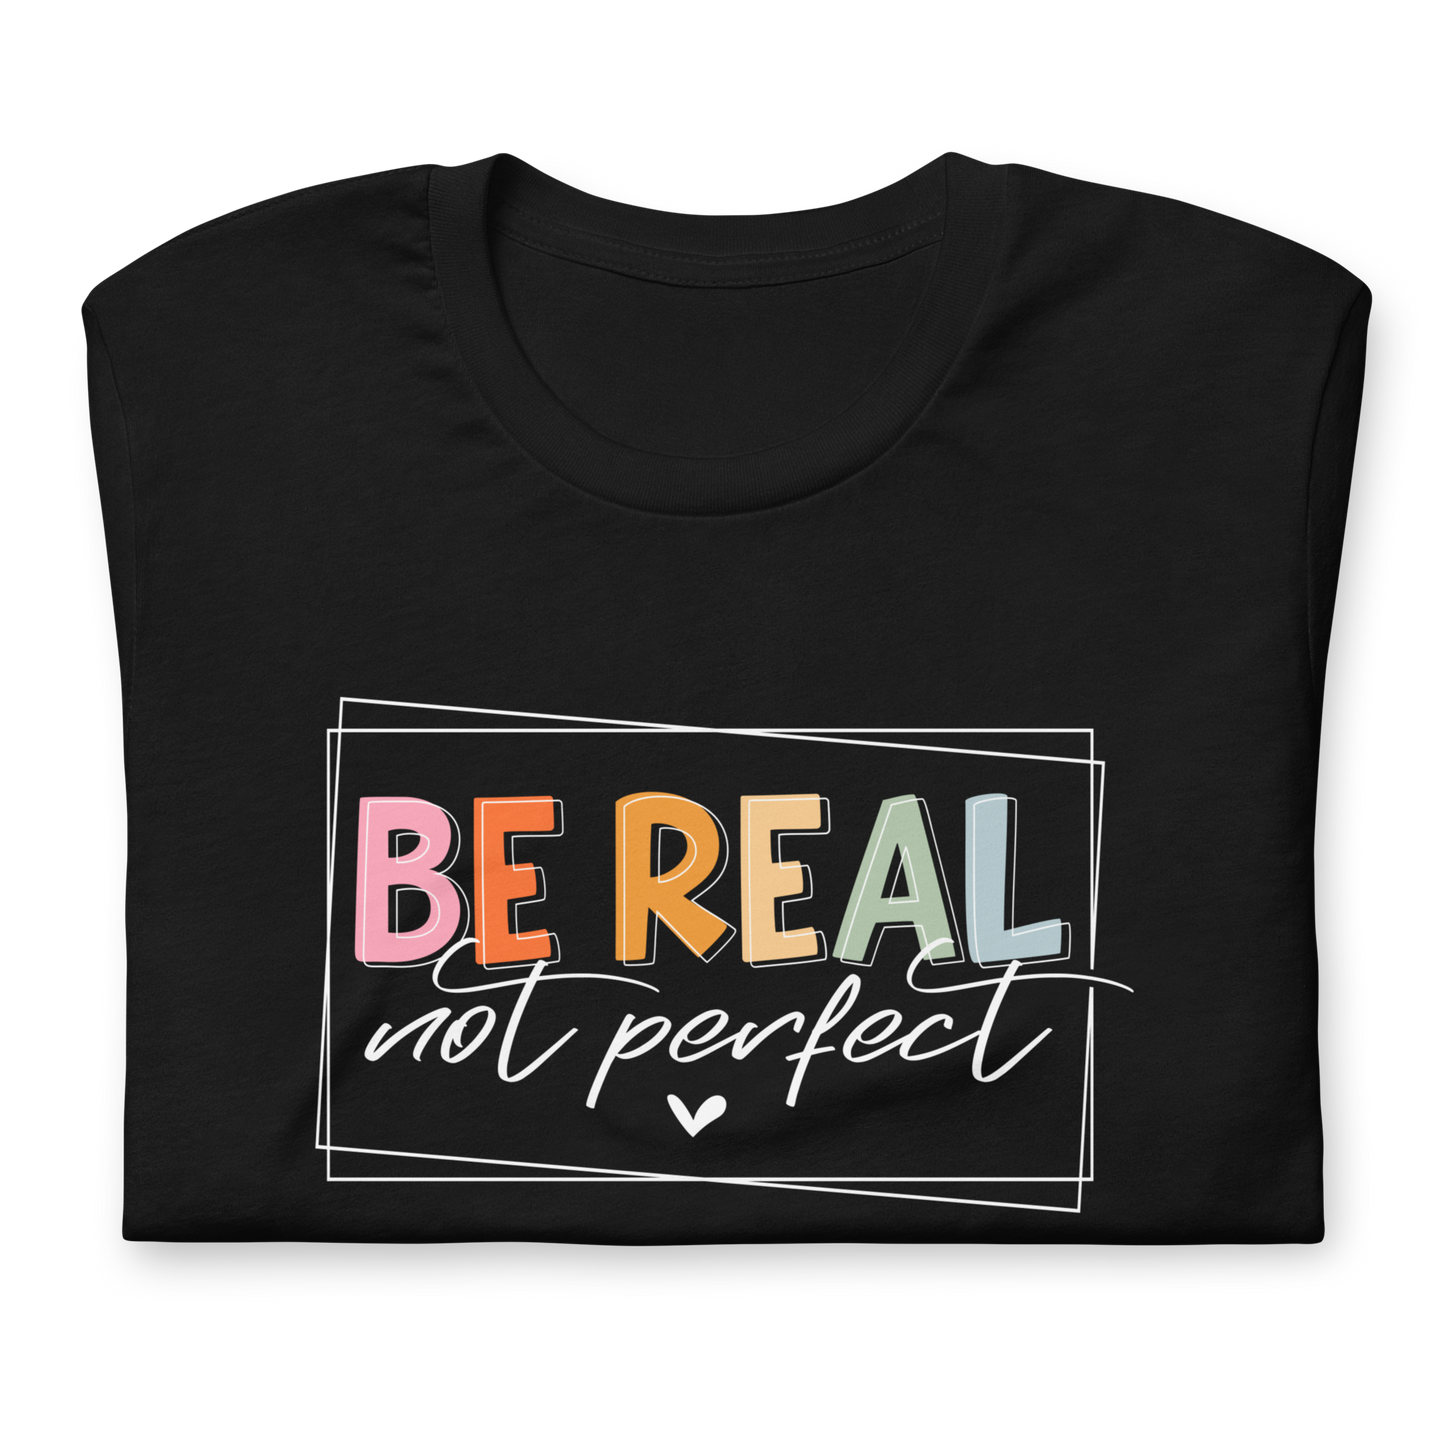 Unisex t-shirt: "Be real, not perfect"